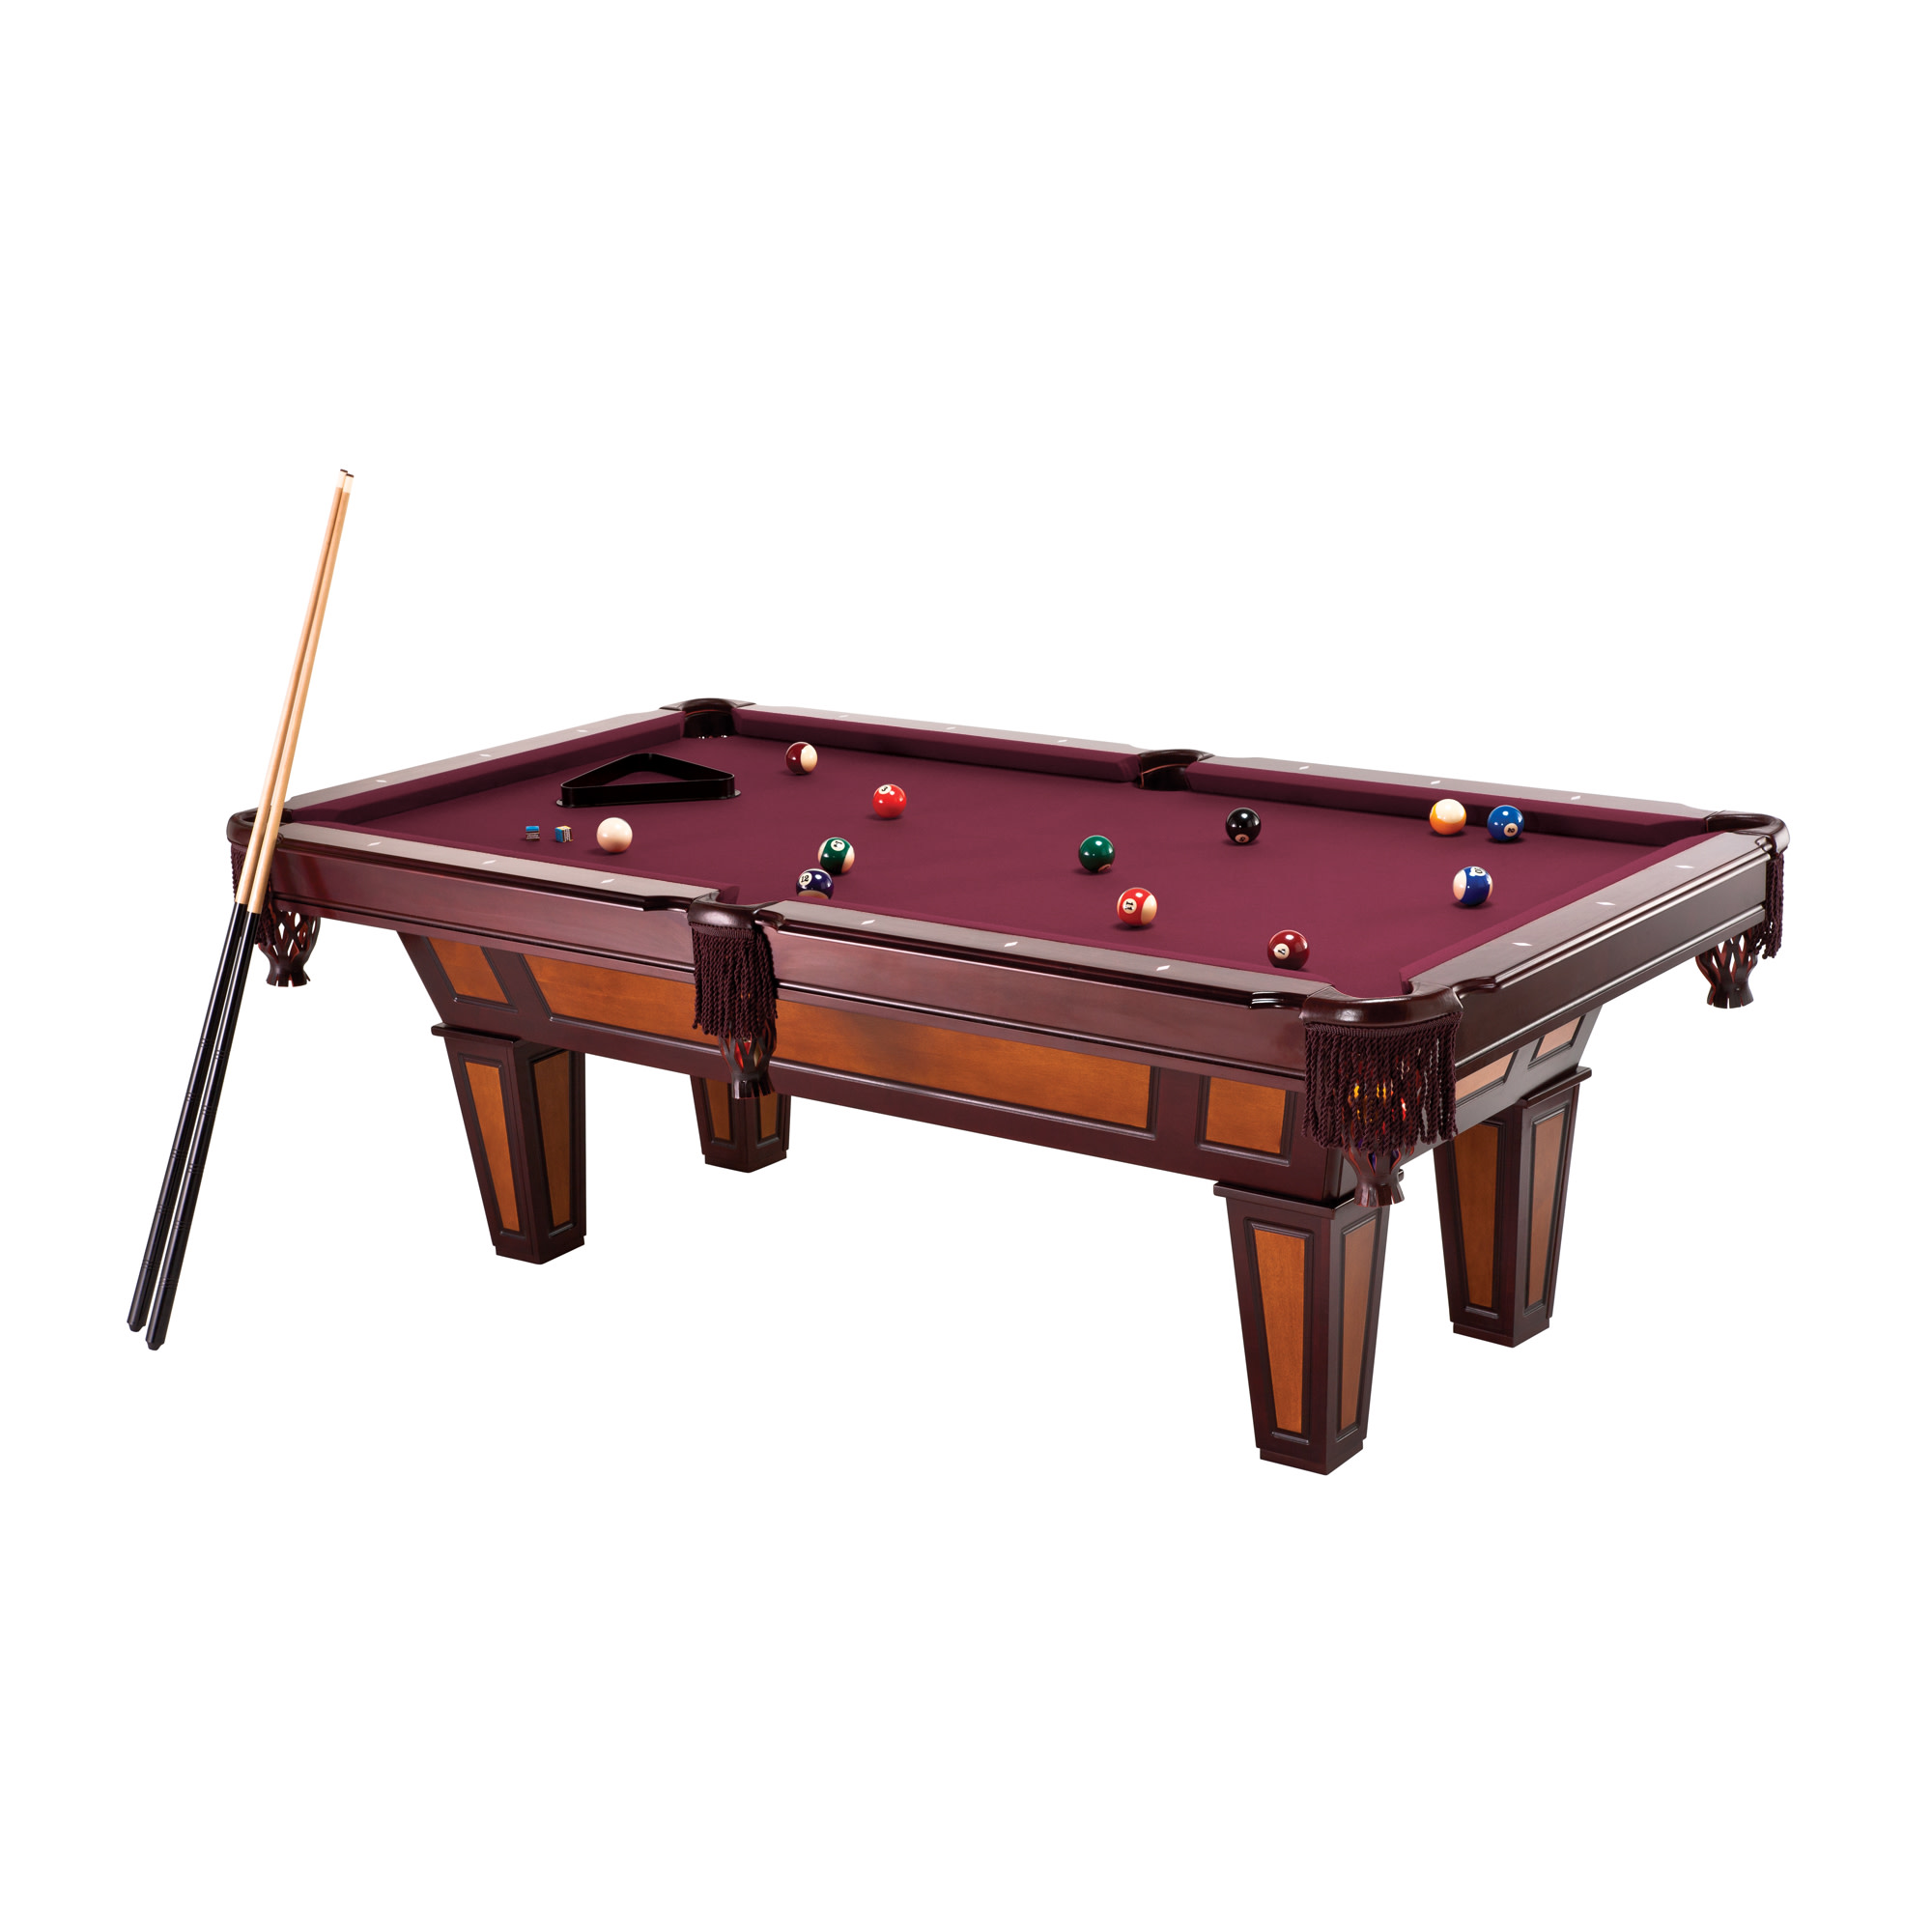 Fat Cat Reno 7.5' Pool Table with Pool Cues and Accessories - image 4 of 13